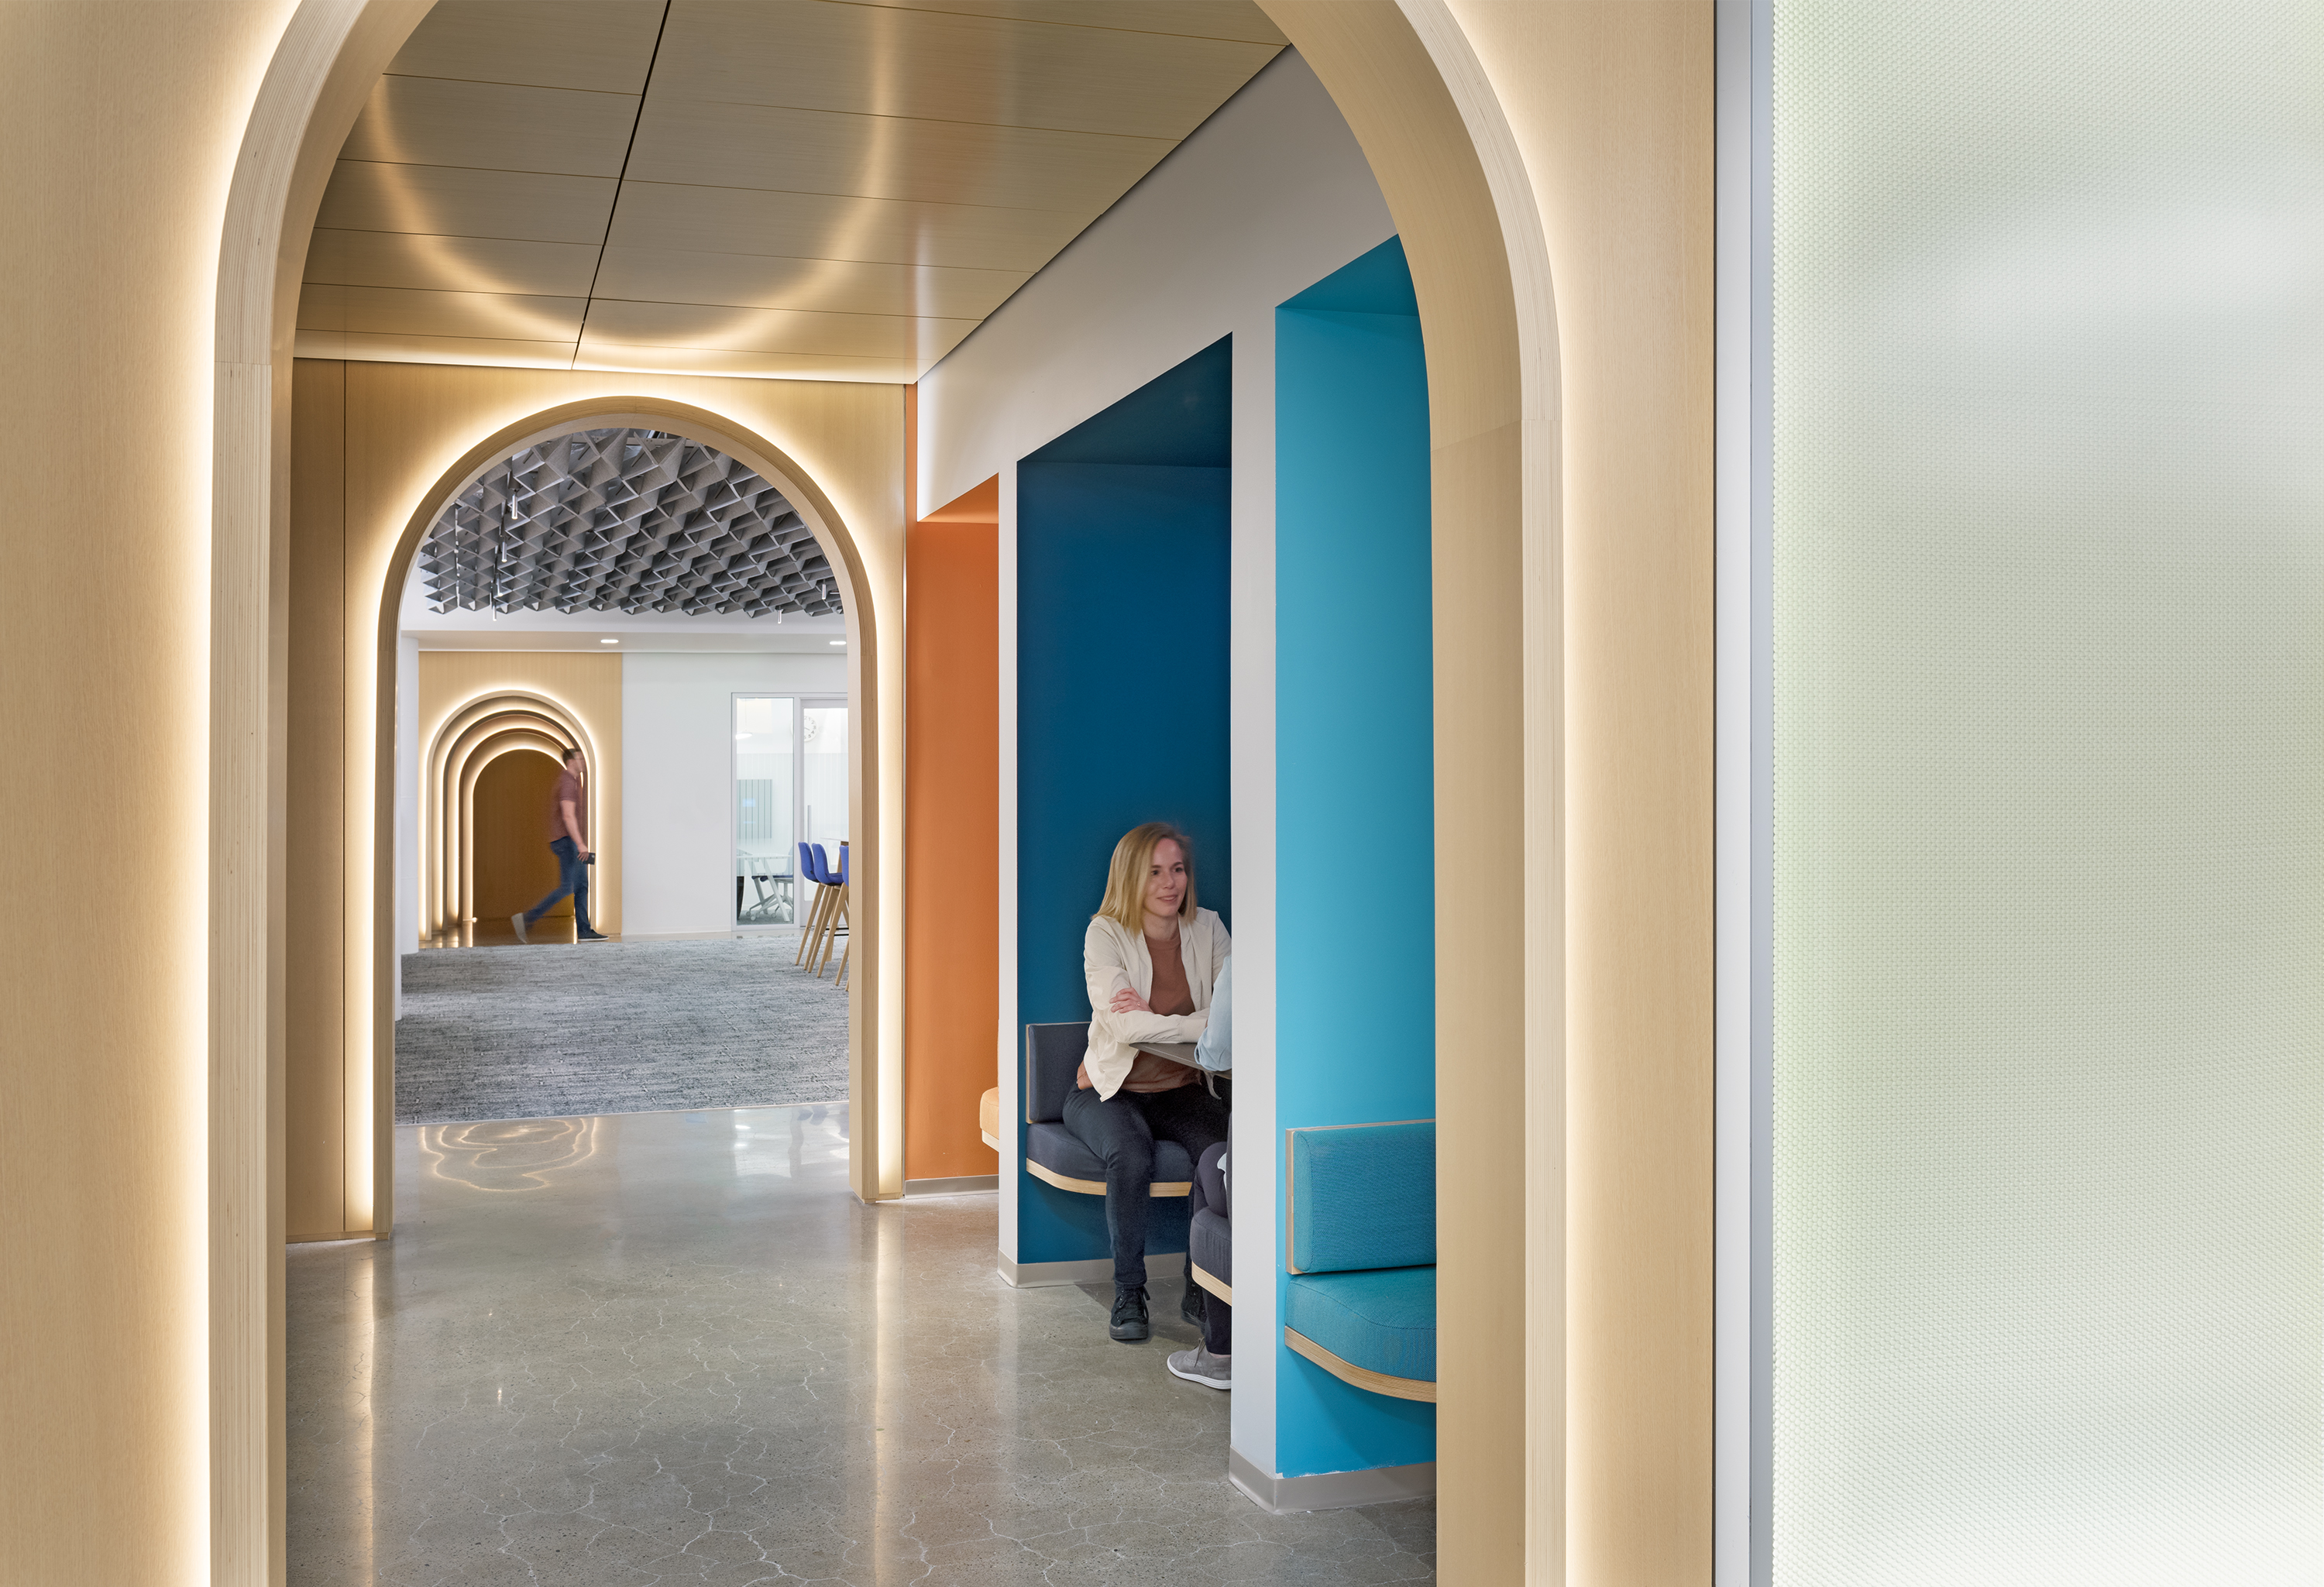 Utile’s Autodesk Boston Workspace Expansion featured in AN Interior!